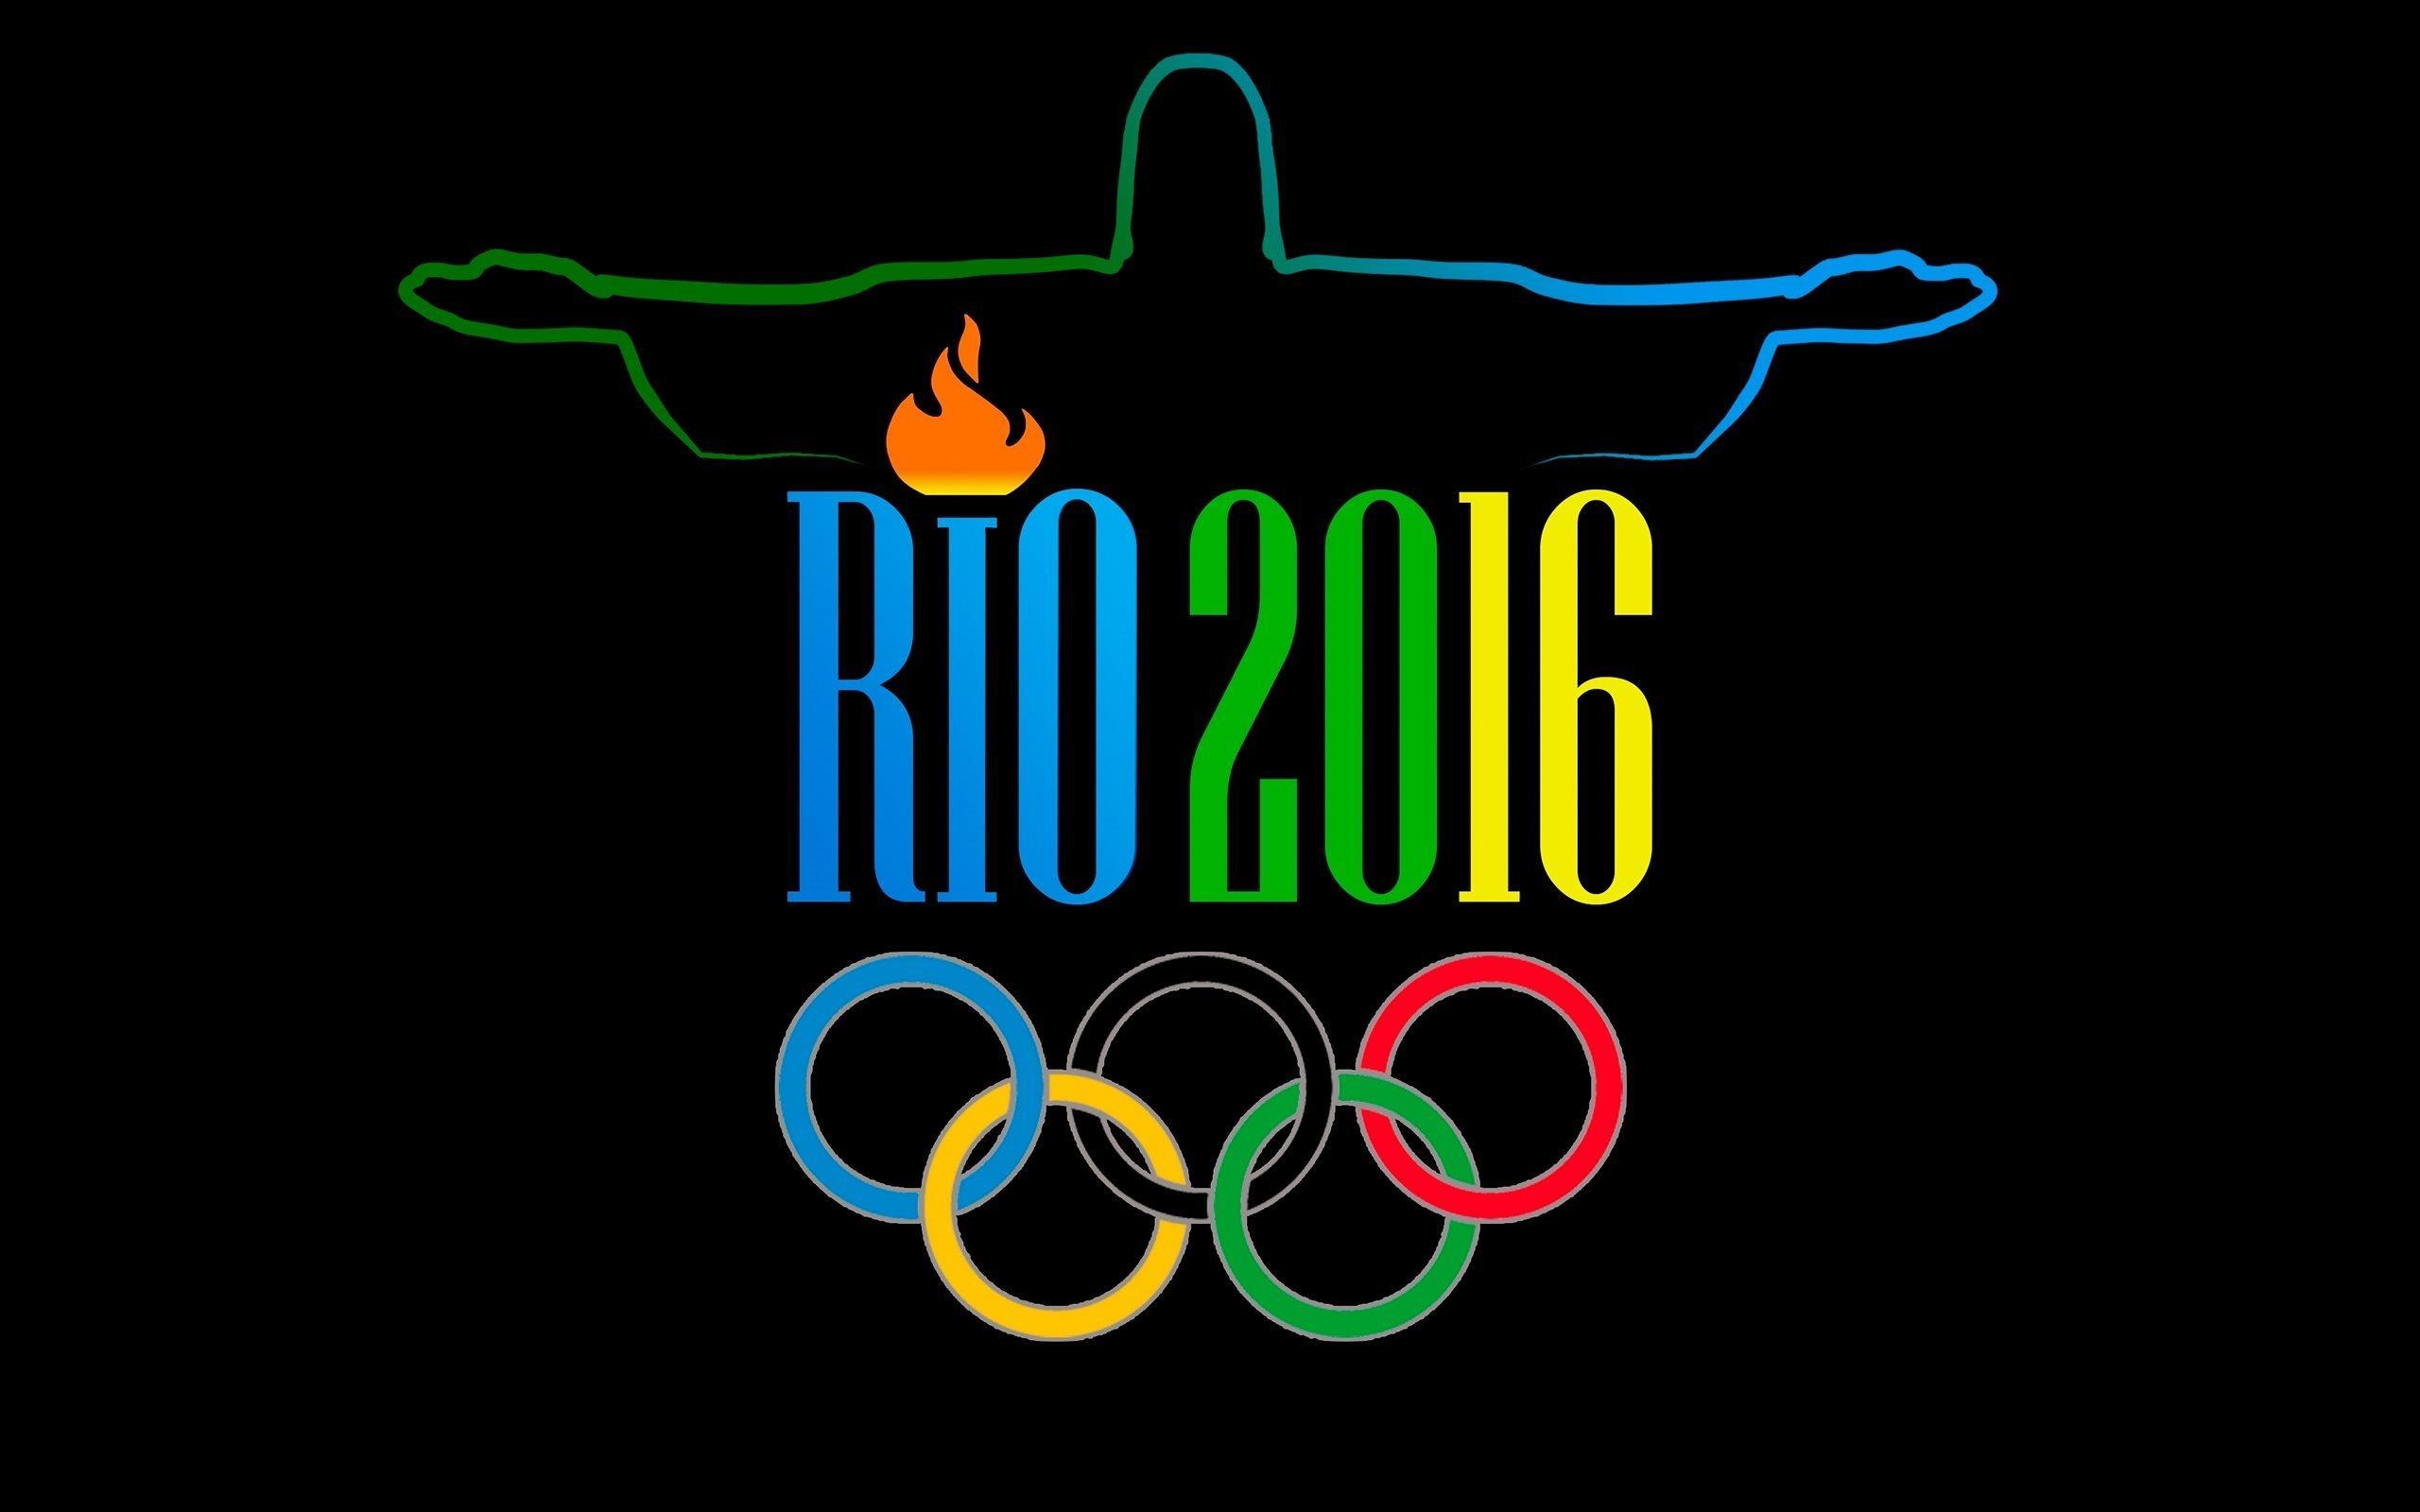 Download wallpaper brazil, emblem, olympic games, logo, rio rio de janeiro summer olympics for desktop with resolution 2560x1600. High Quality HD picture wallpaper